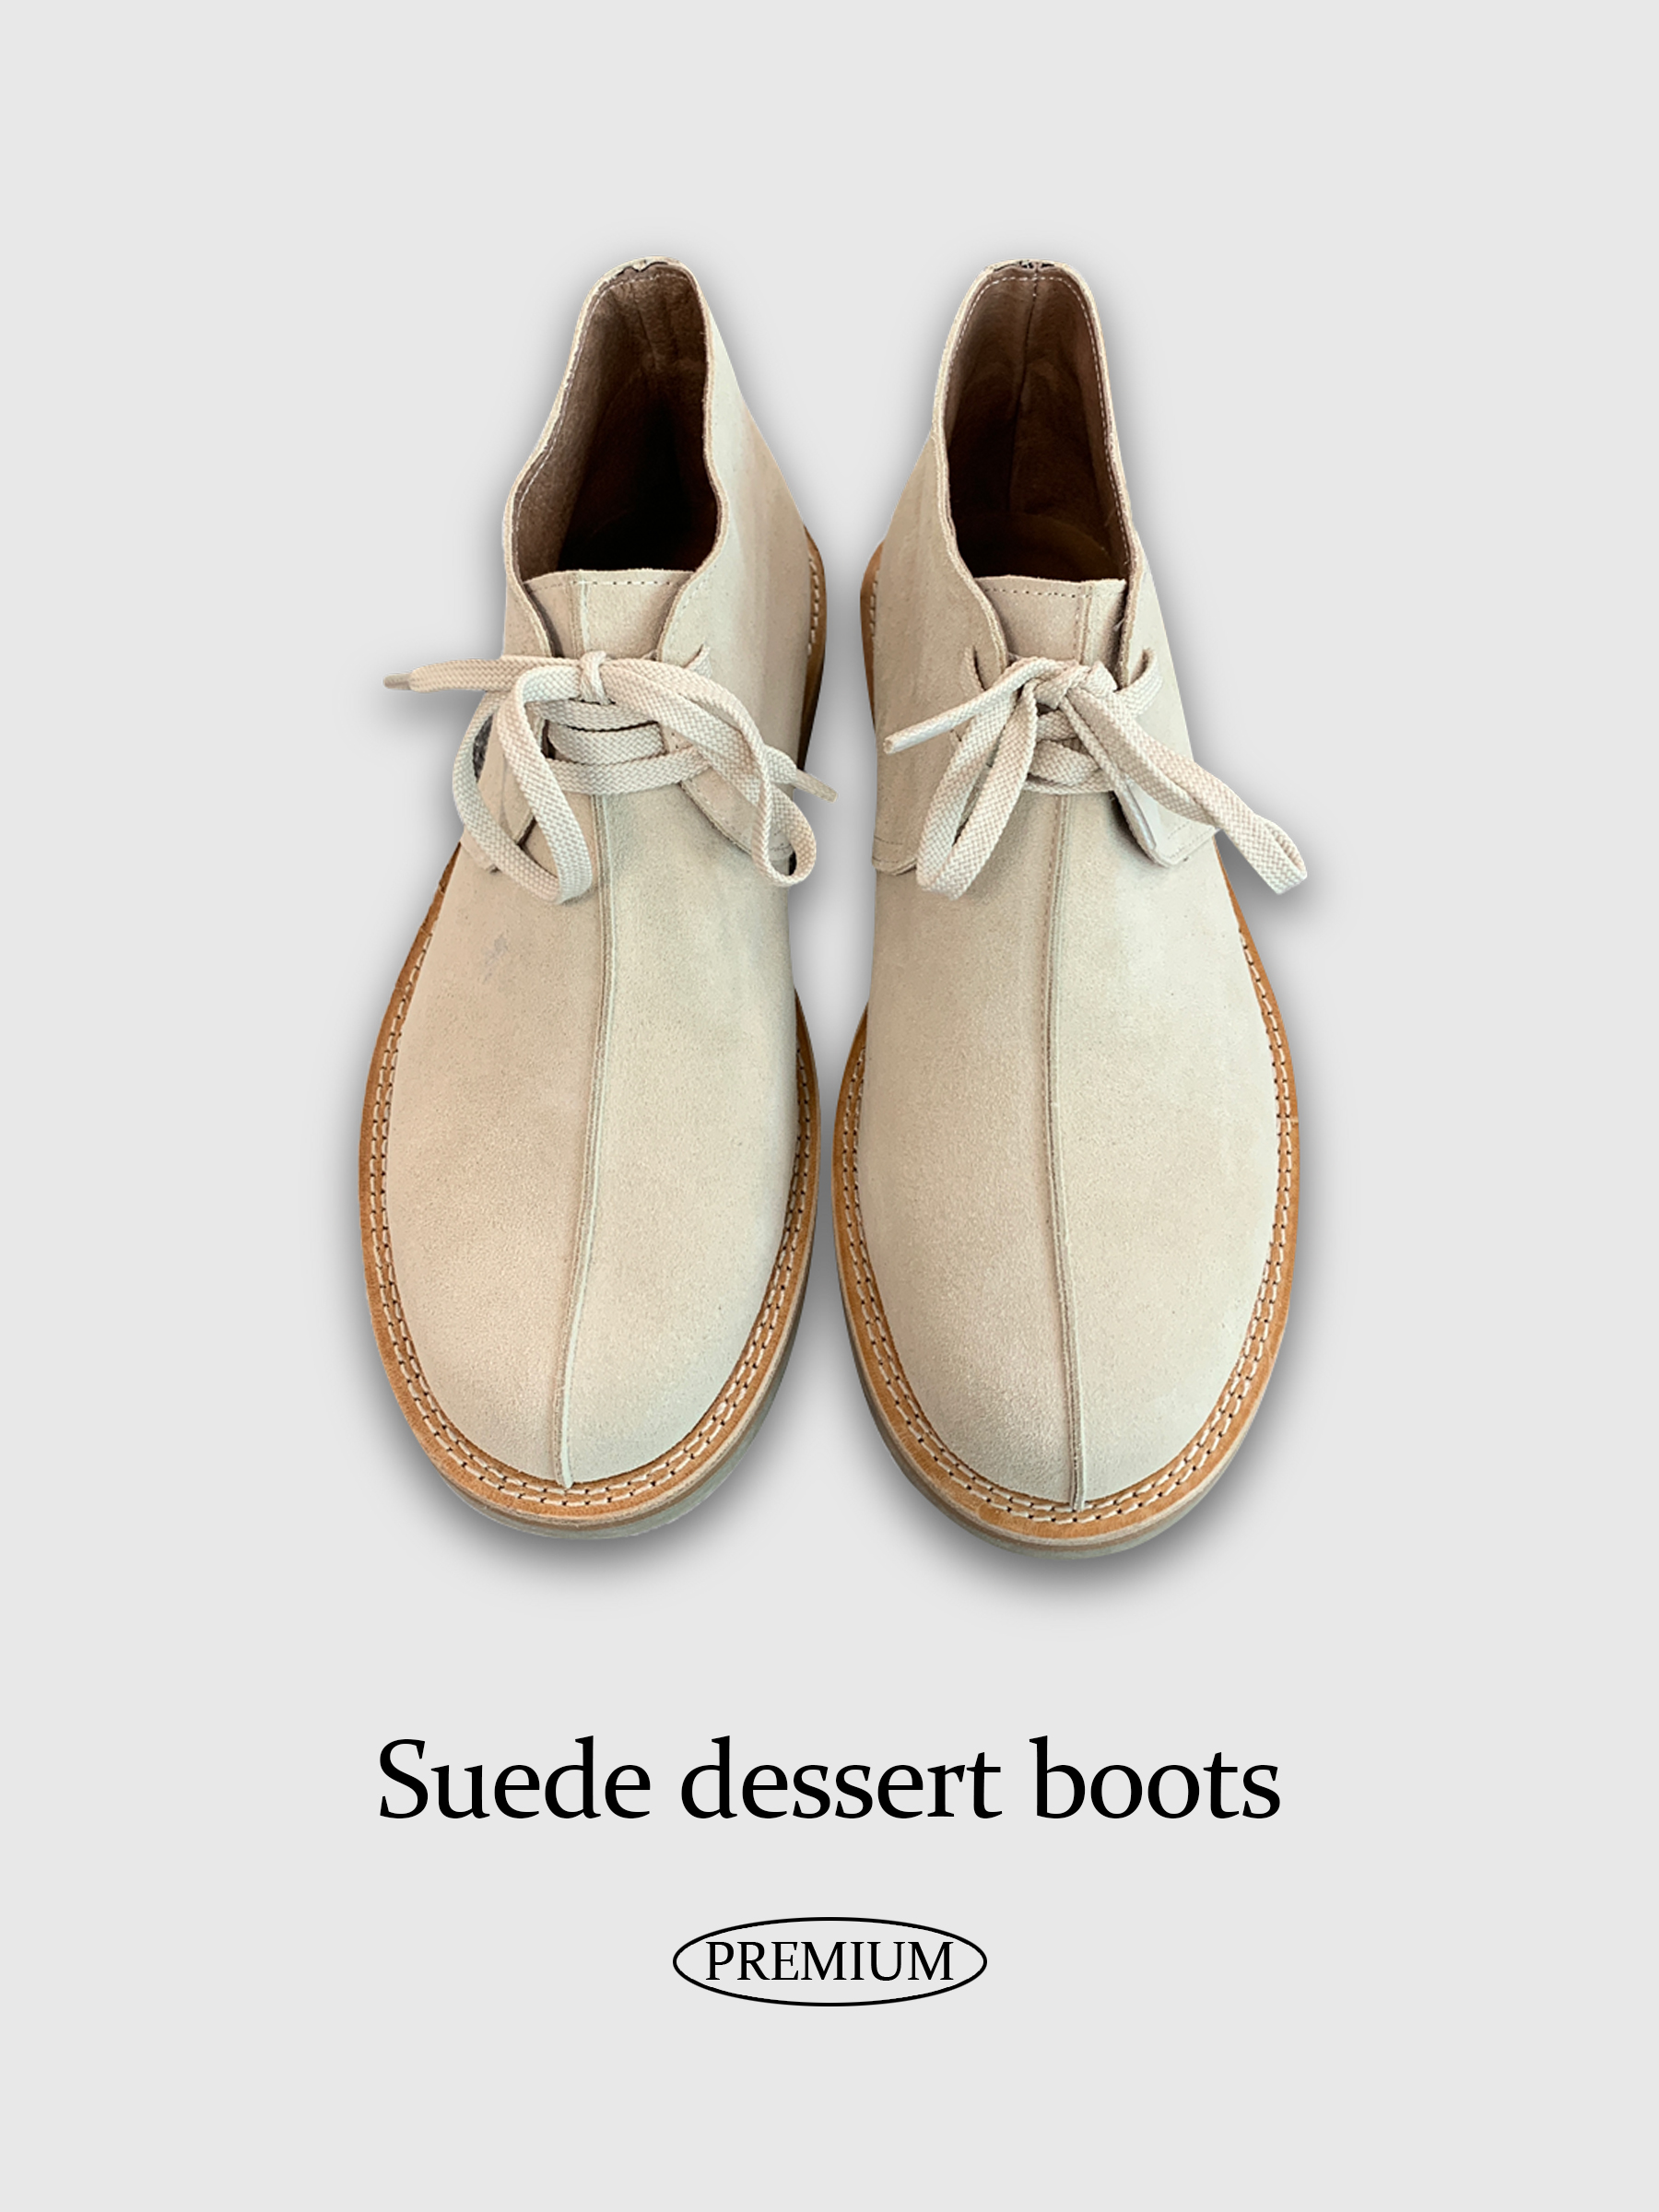 Suede dessert boots [High Quality!]